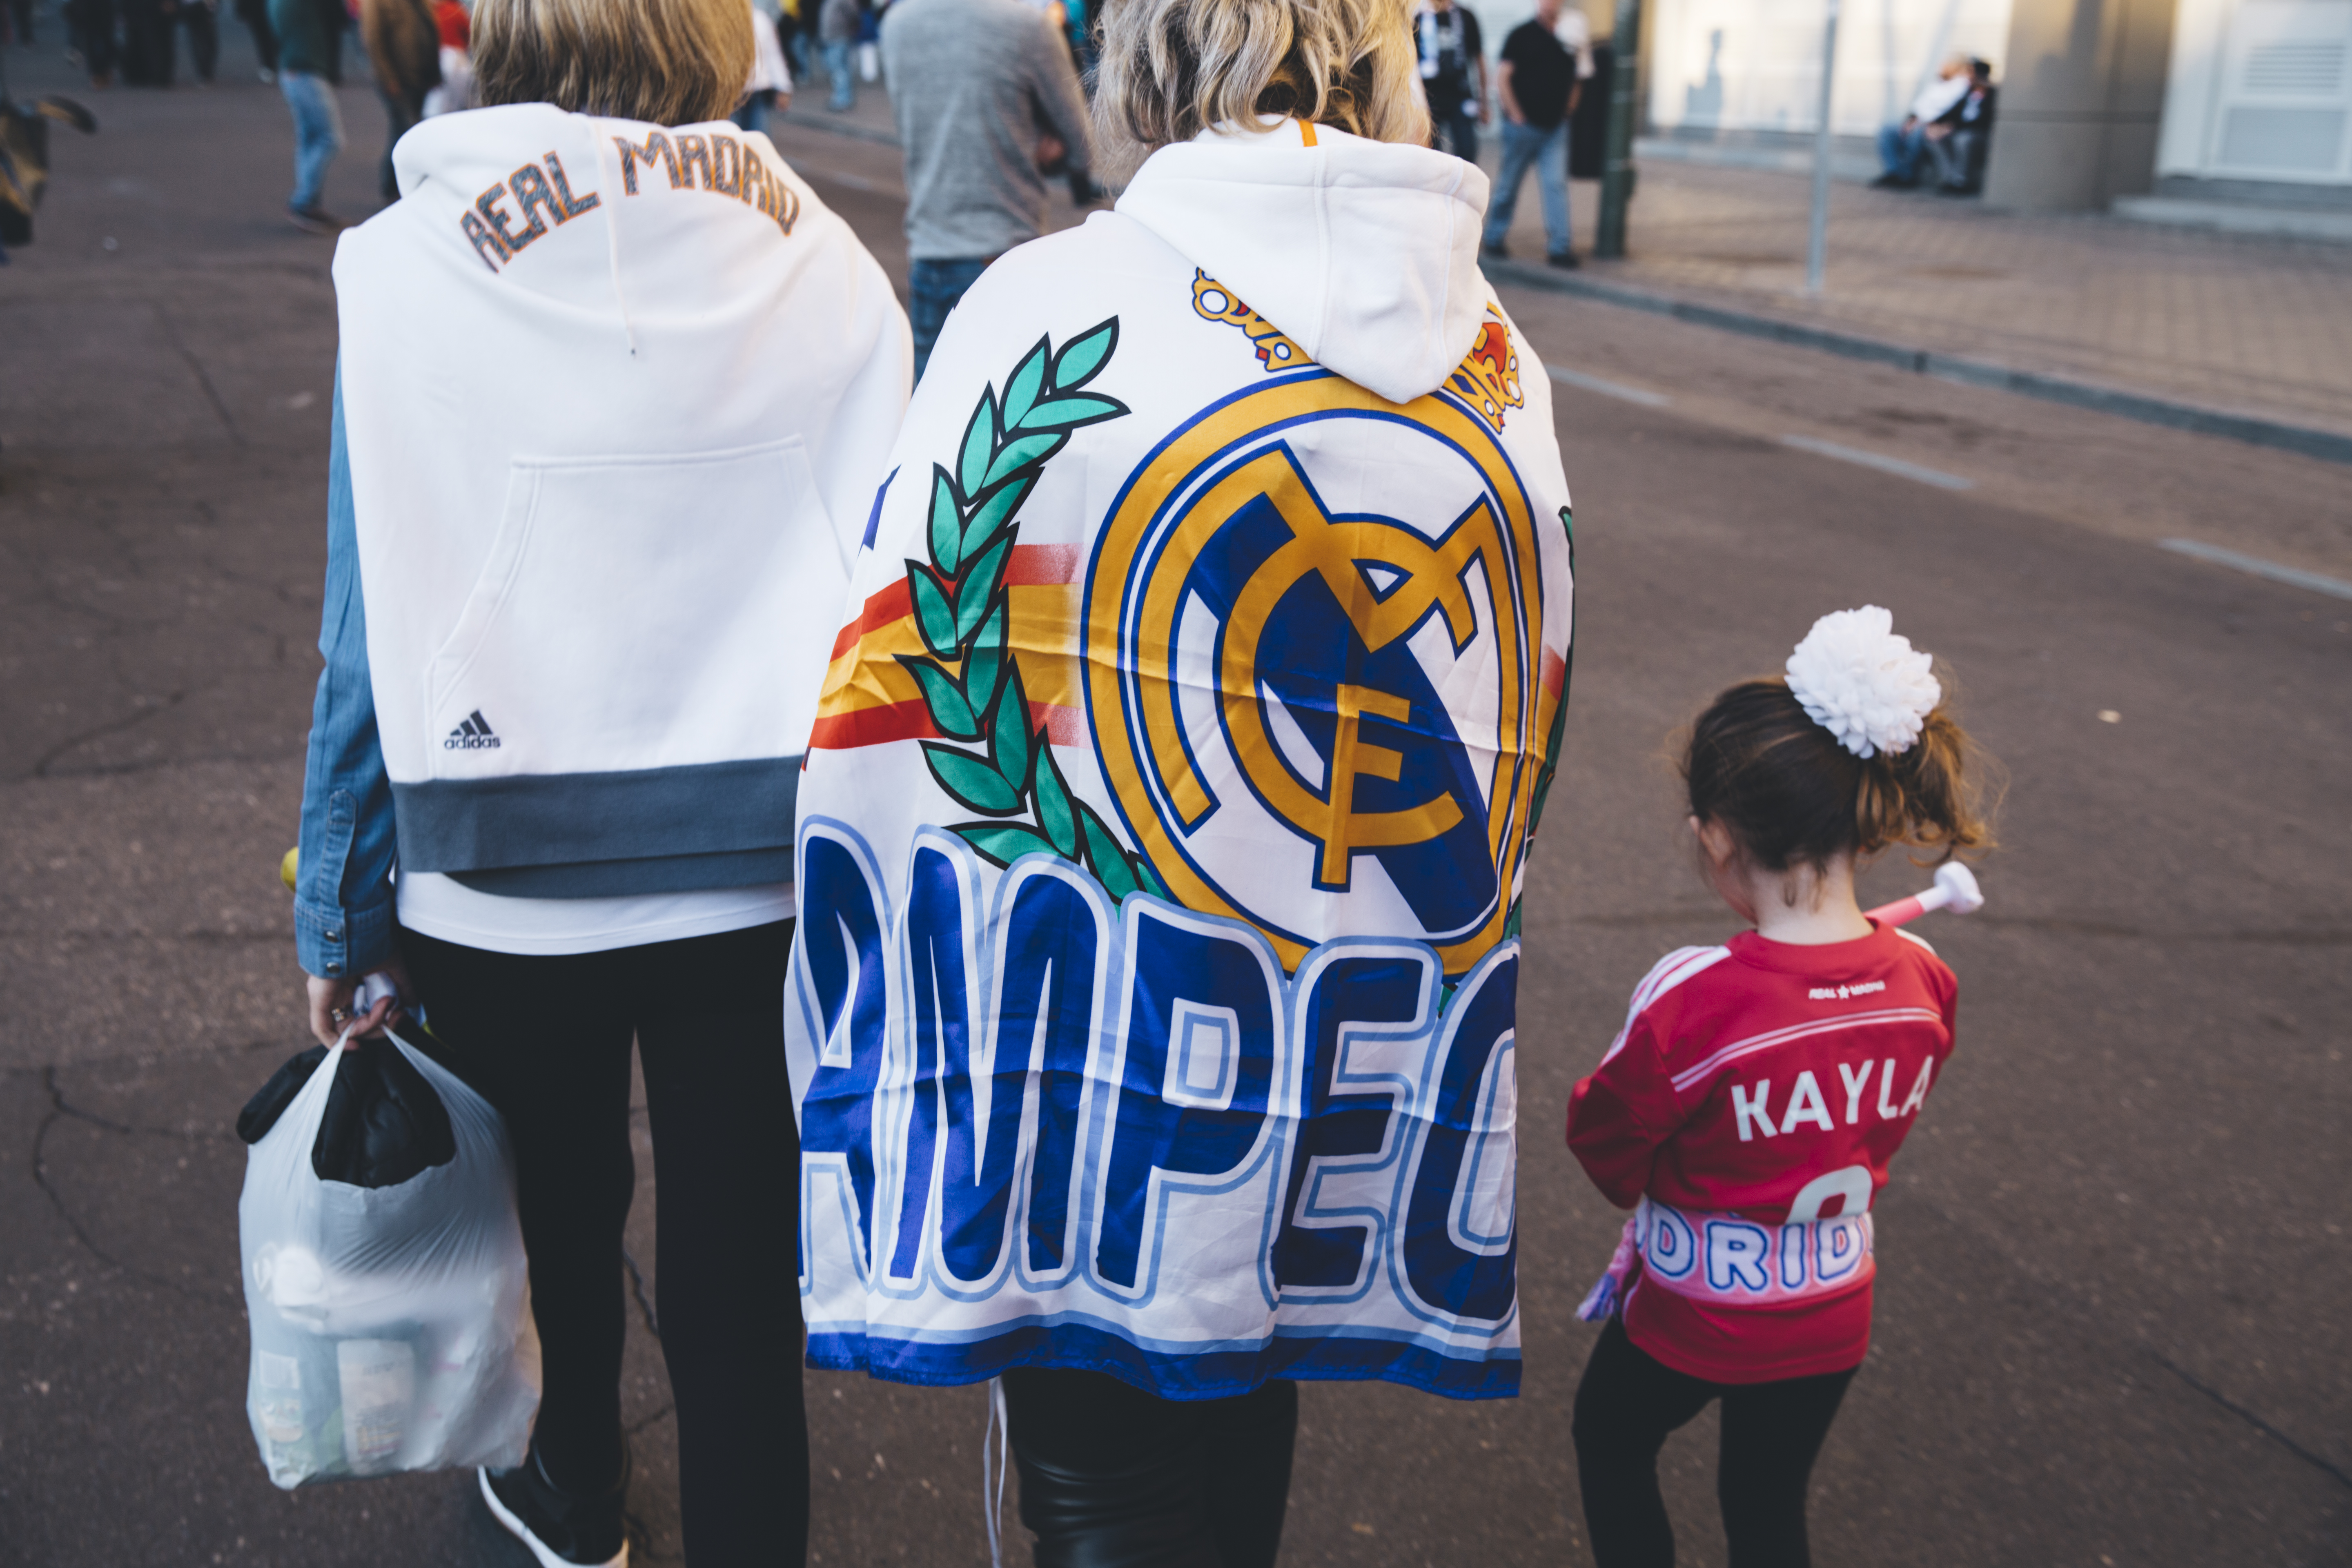 Real Madrid’s loyal fans hail from around the world. 